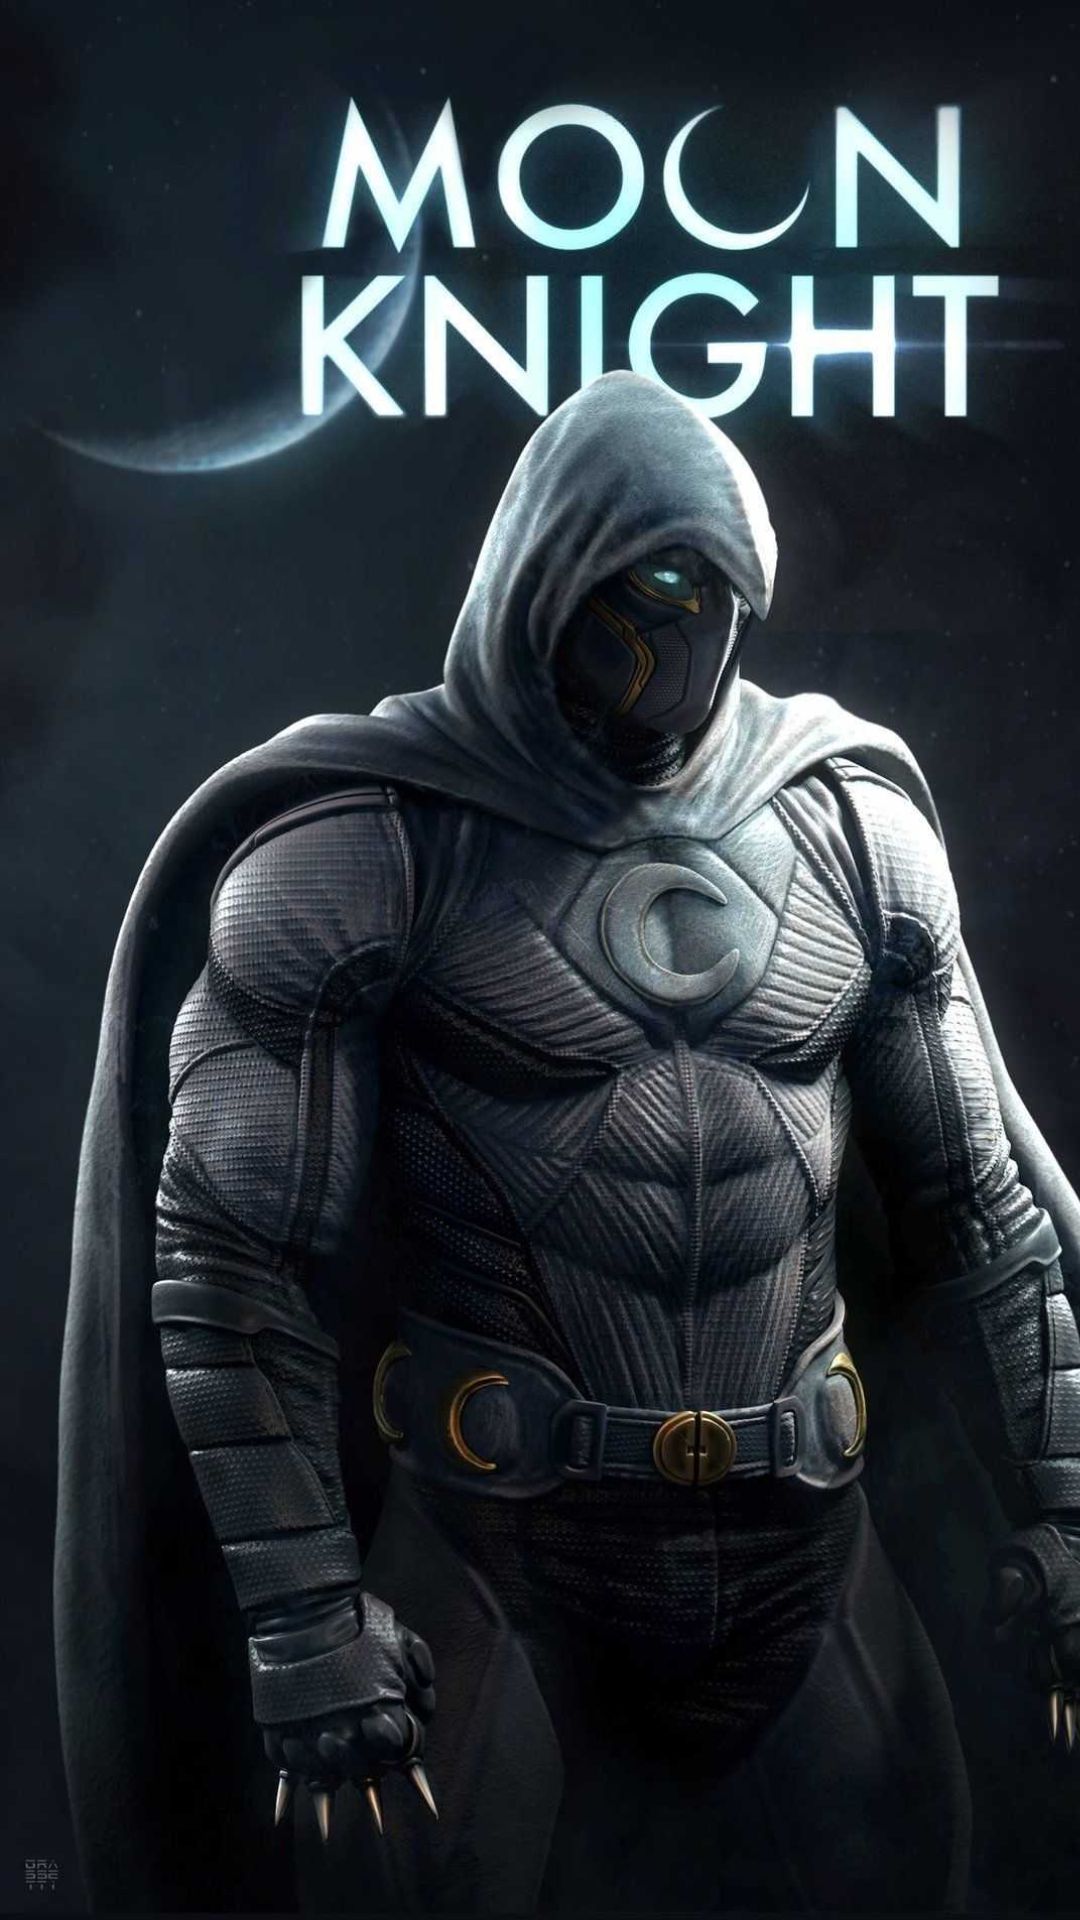 Moon Knight Wallpapers  Top 35 Best Moon Knight Backgrounds Download